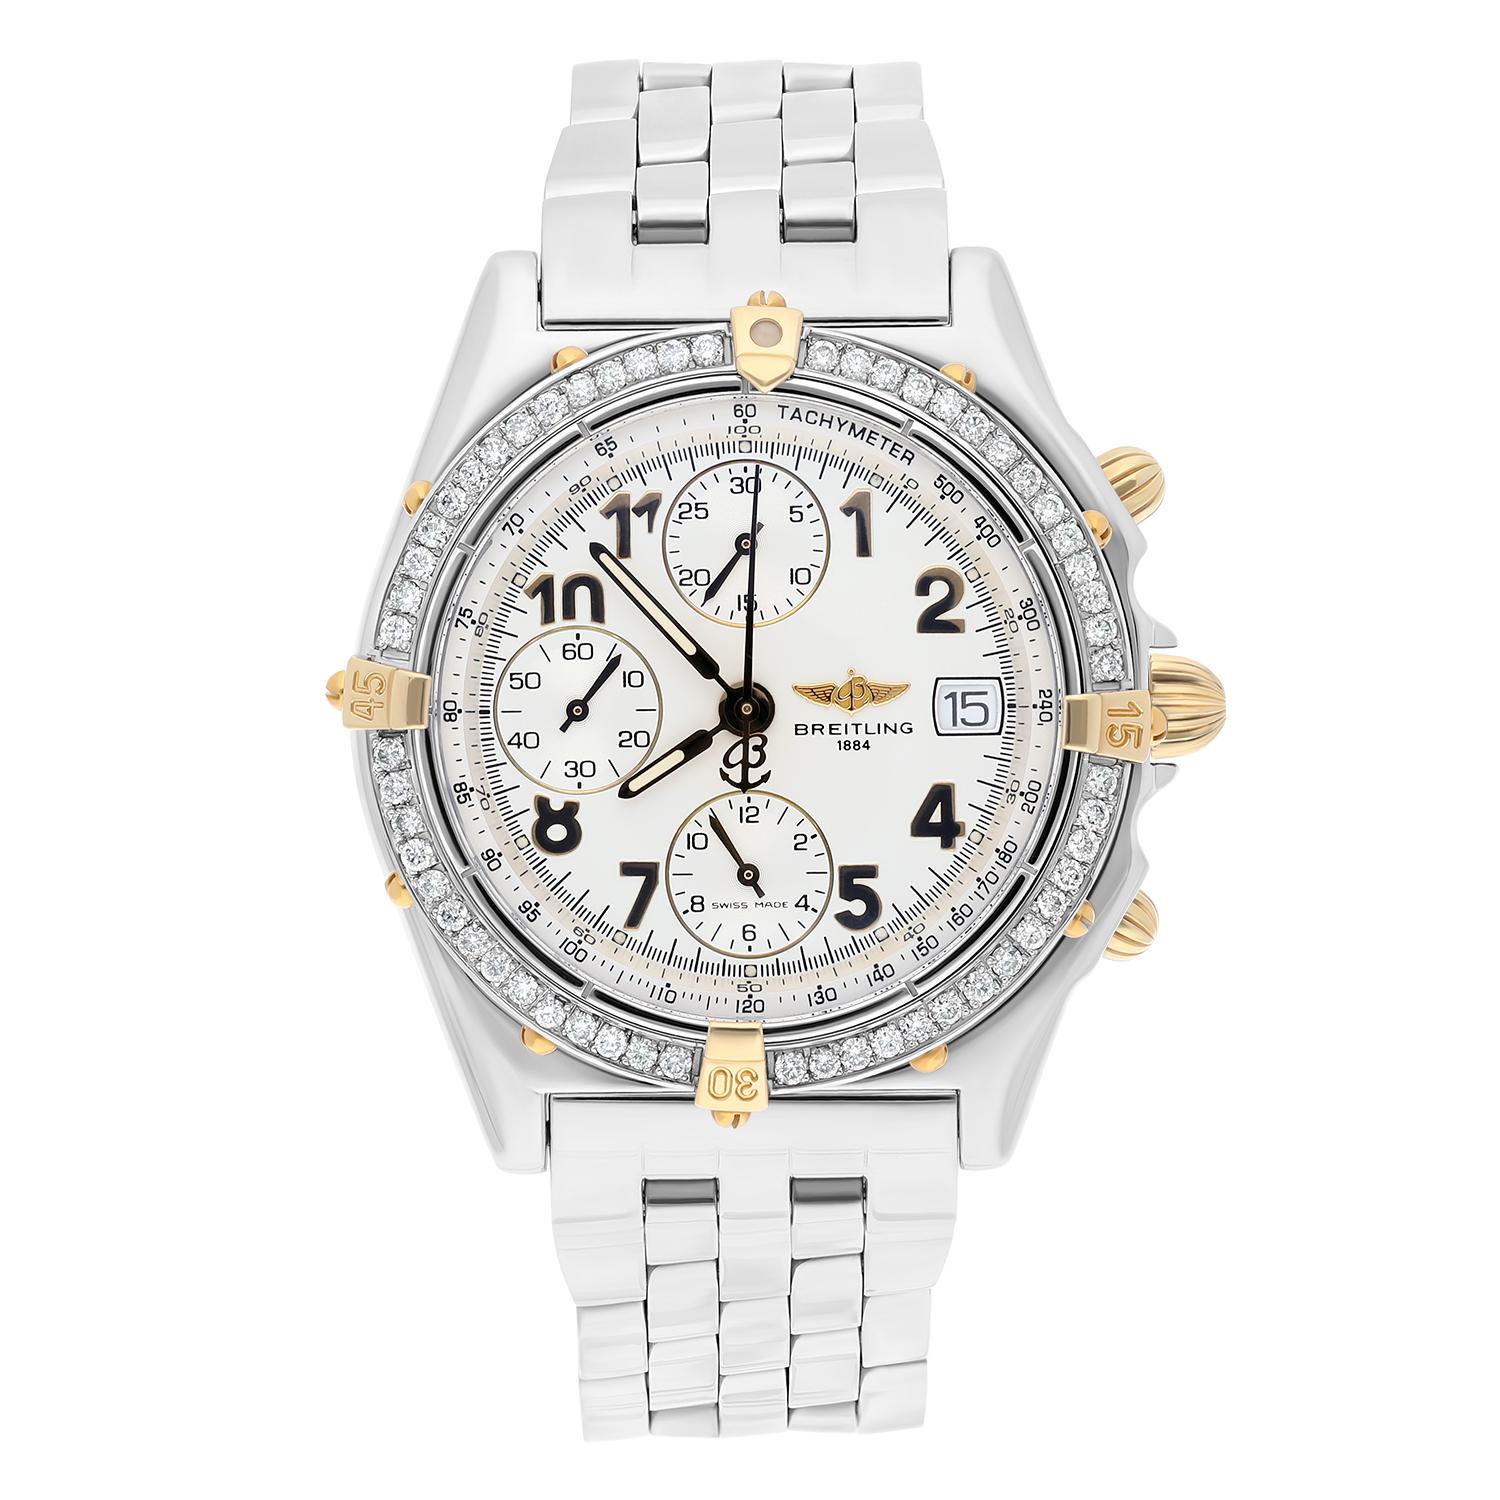 Brand: Breitling 
Series: Chronomat  
Model: B13050
Case Diameter: 39 mm
Bracelet: Stainless steel
Bezel: YG, Custom diamond set
Dial: Cream dial
The sale includes a jewelry watch box and an appraisal certificate which states the watch's